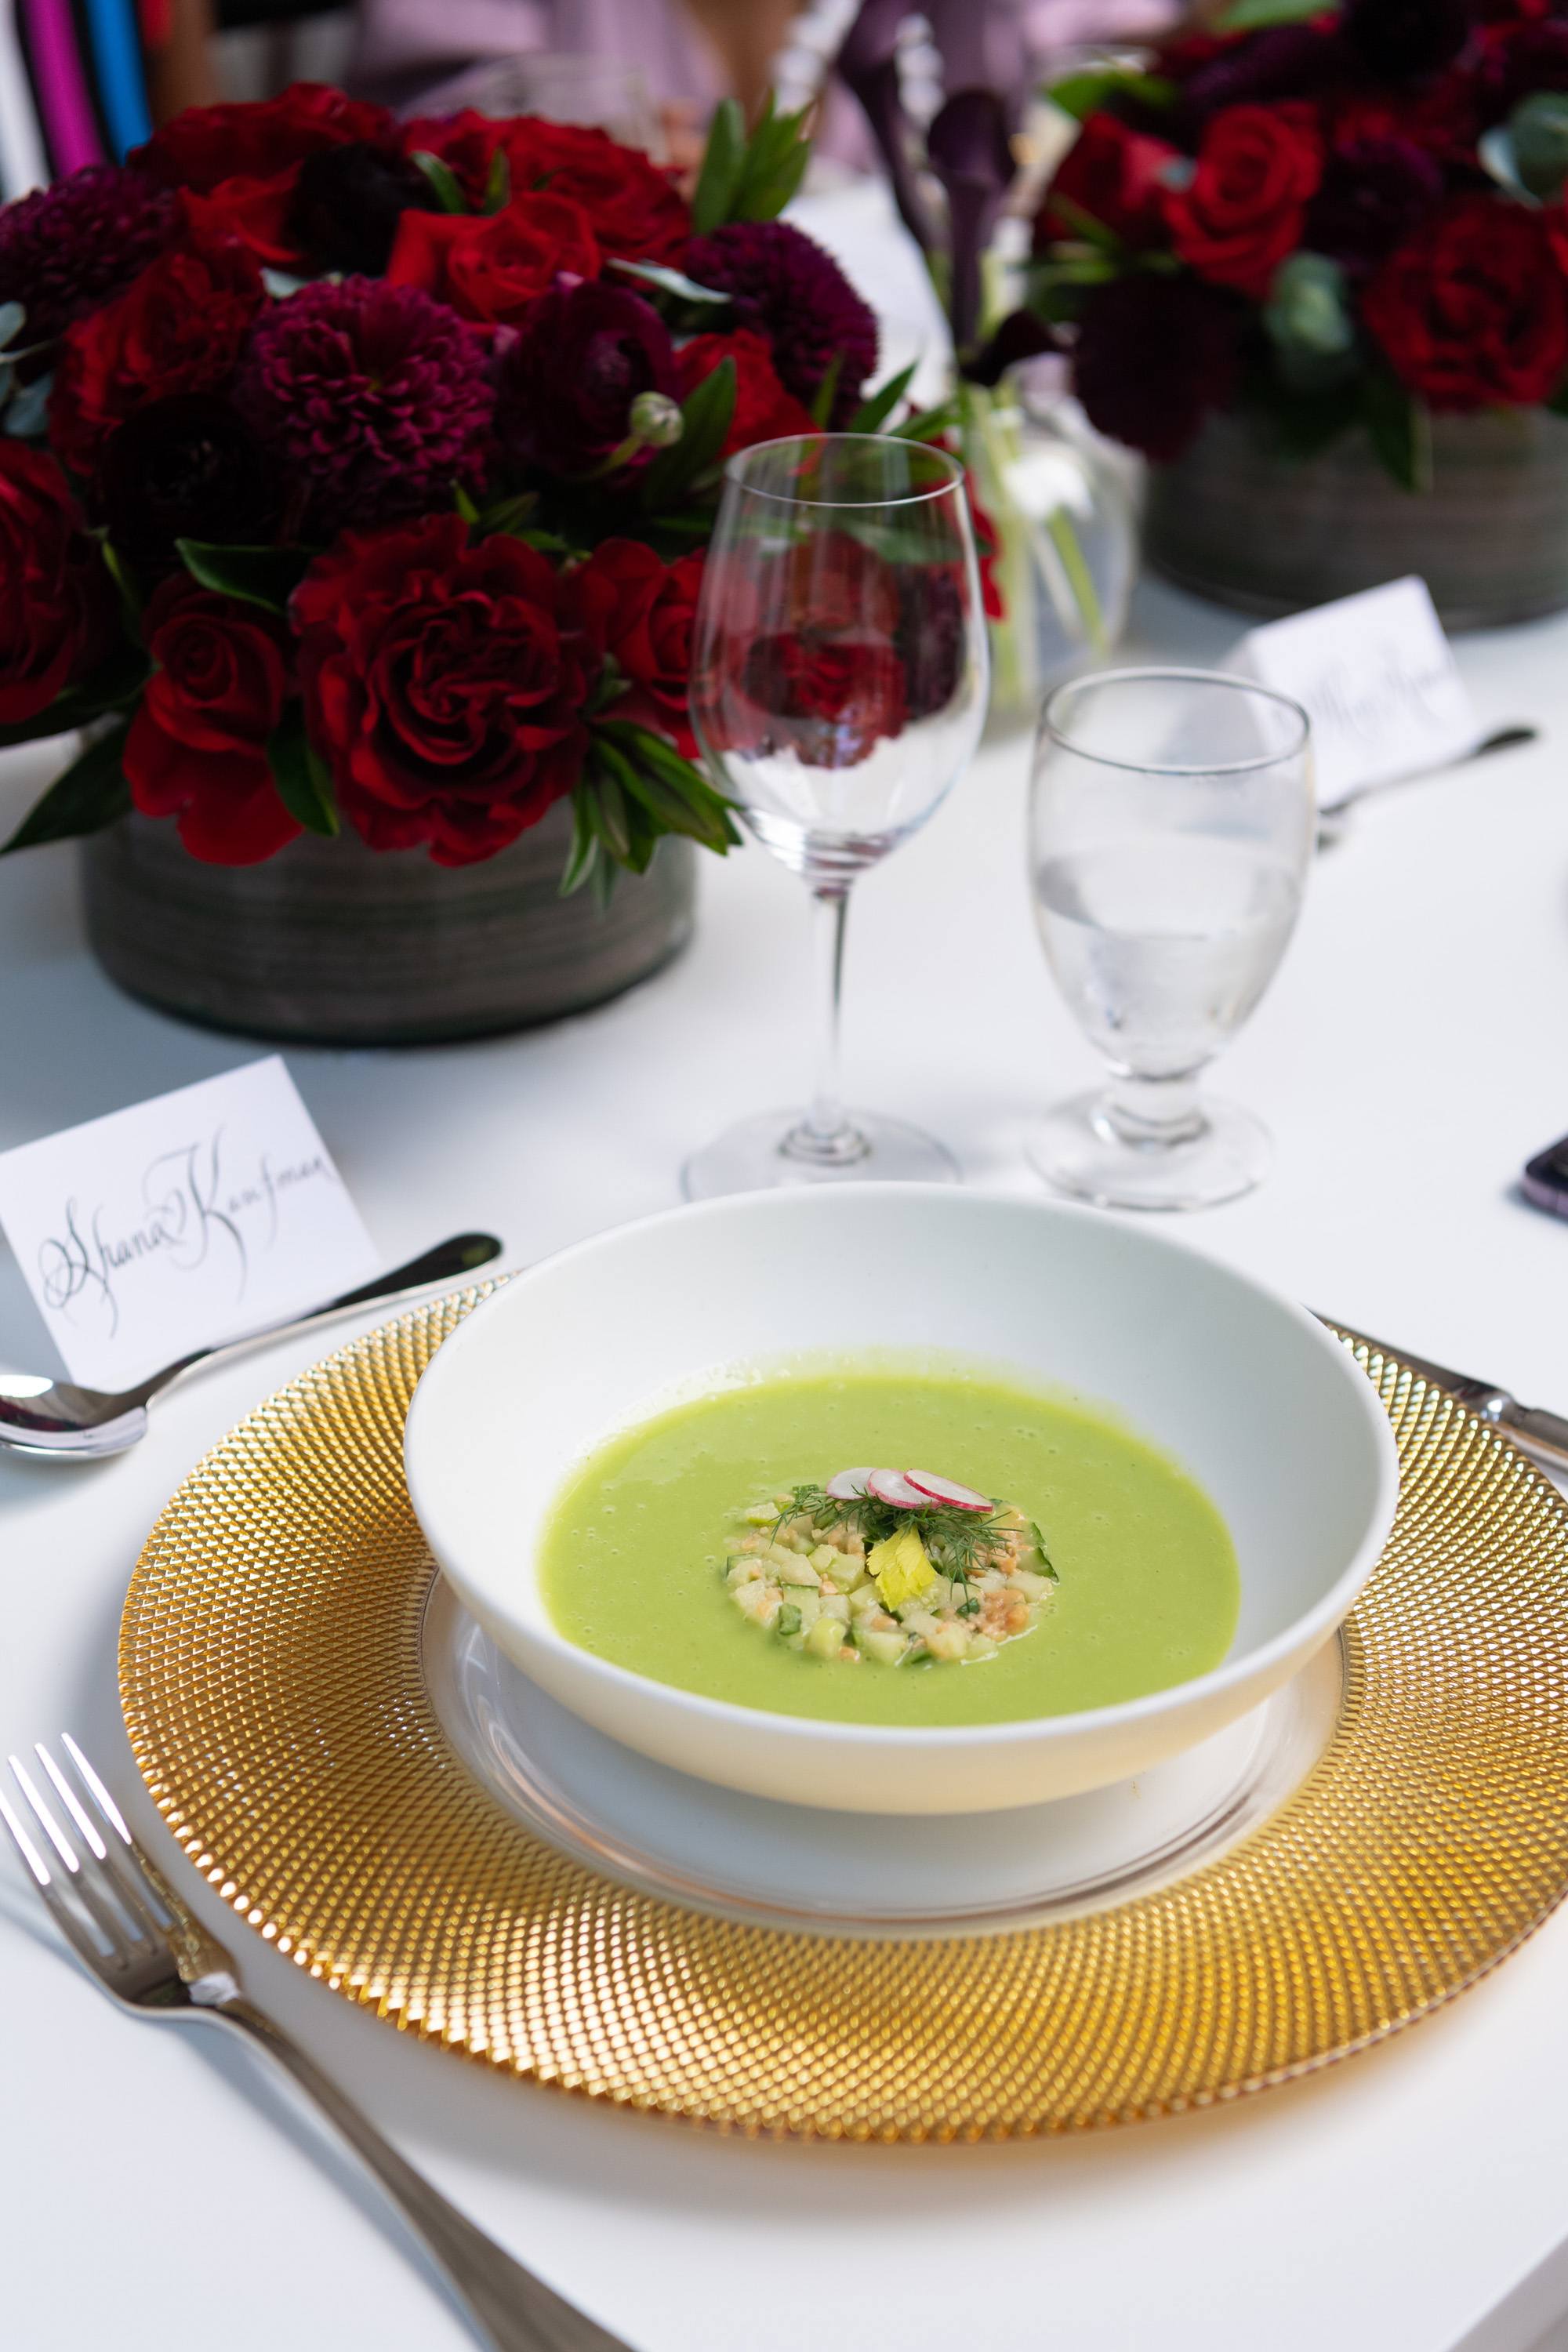 Le Zoo's chilled cucumber soup served at the Bally luncheon